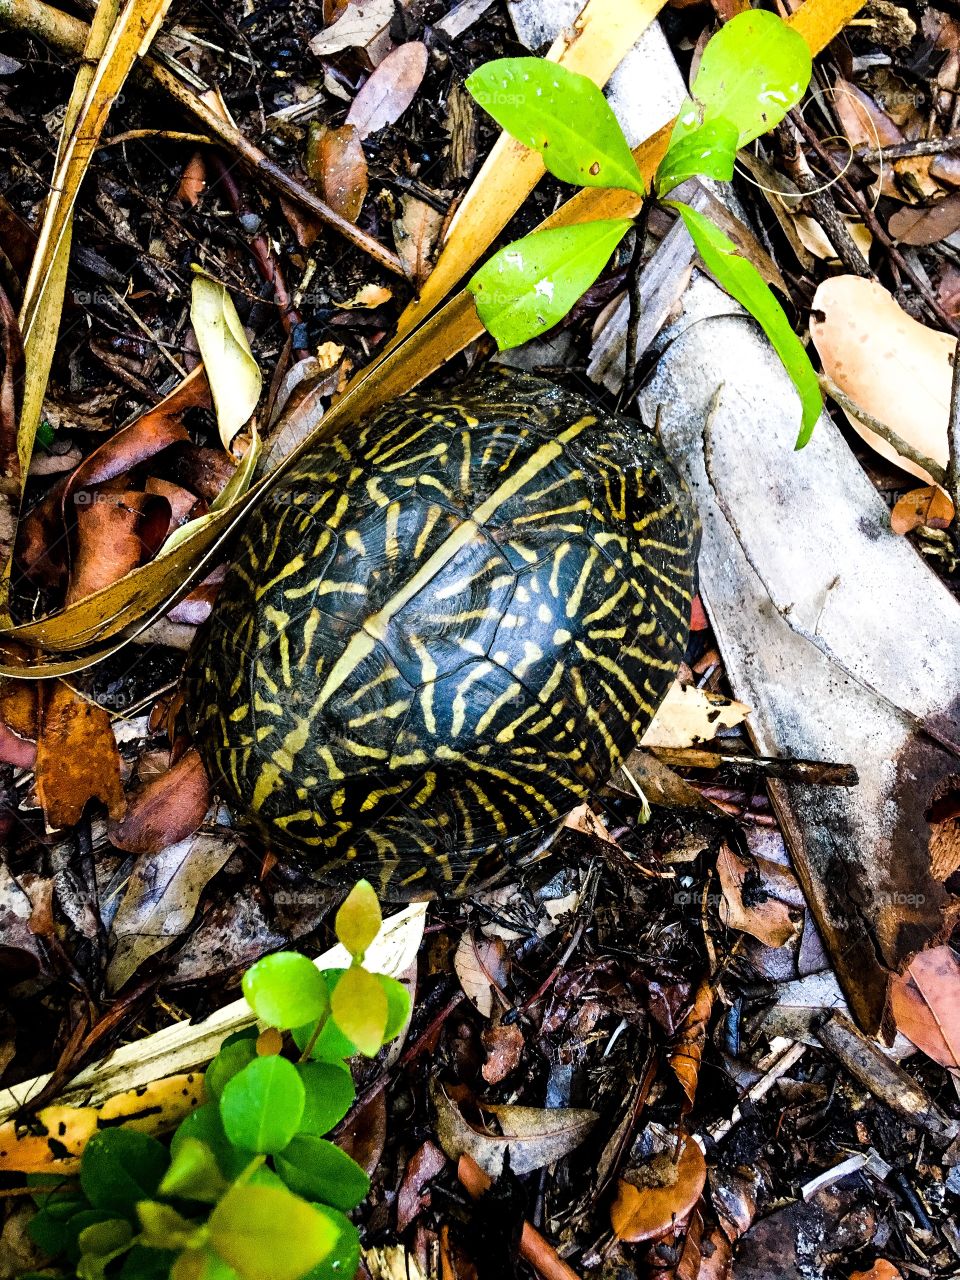 Little turtle, locked tight in shell.